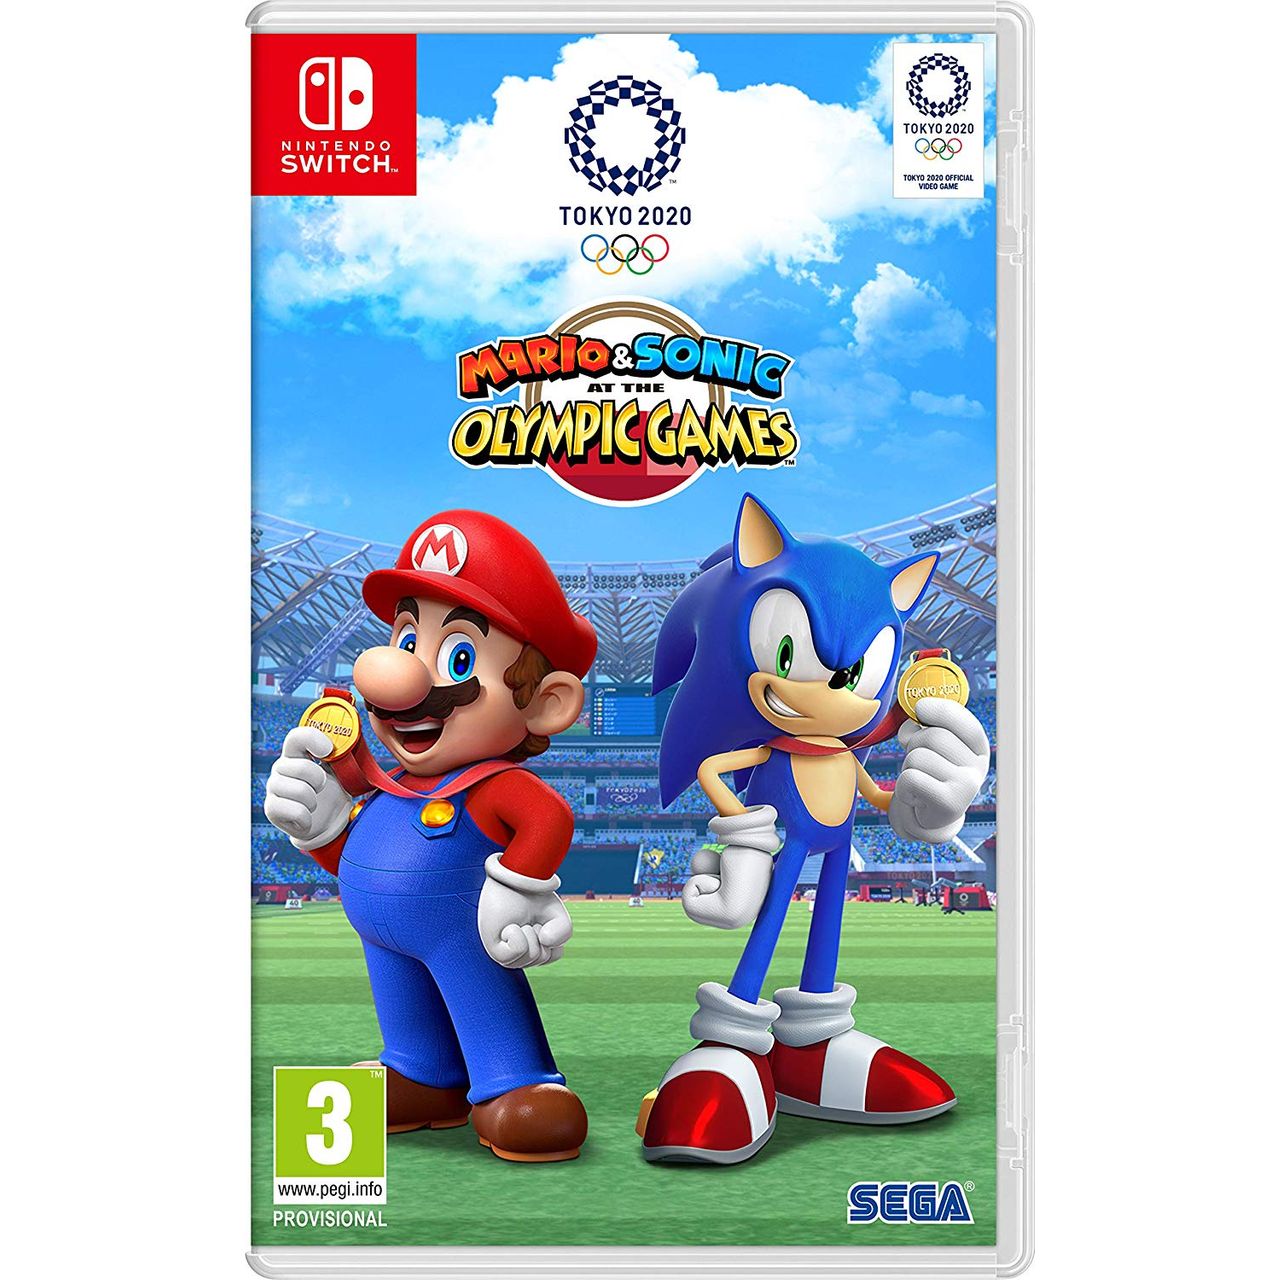 Mario & Sonic at the Olympic Games Tokyo 2020 for Nintendo Switch Review